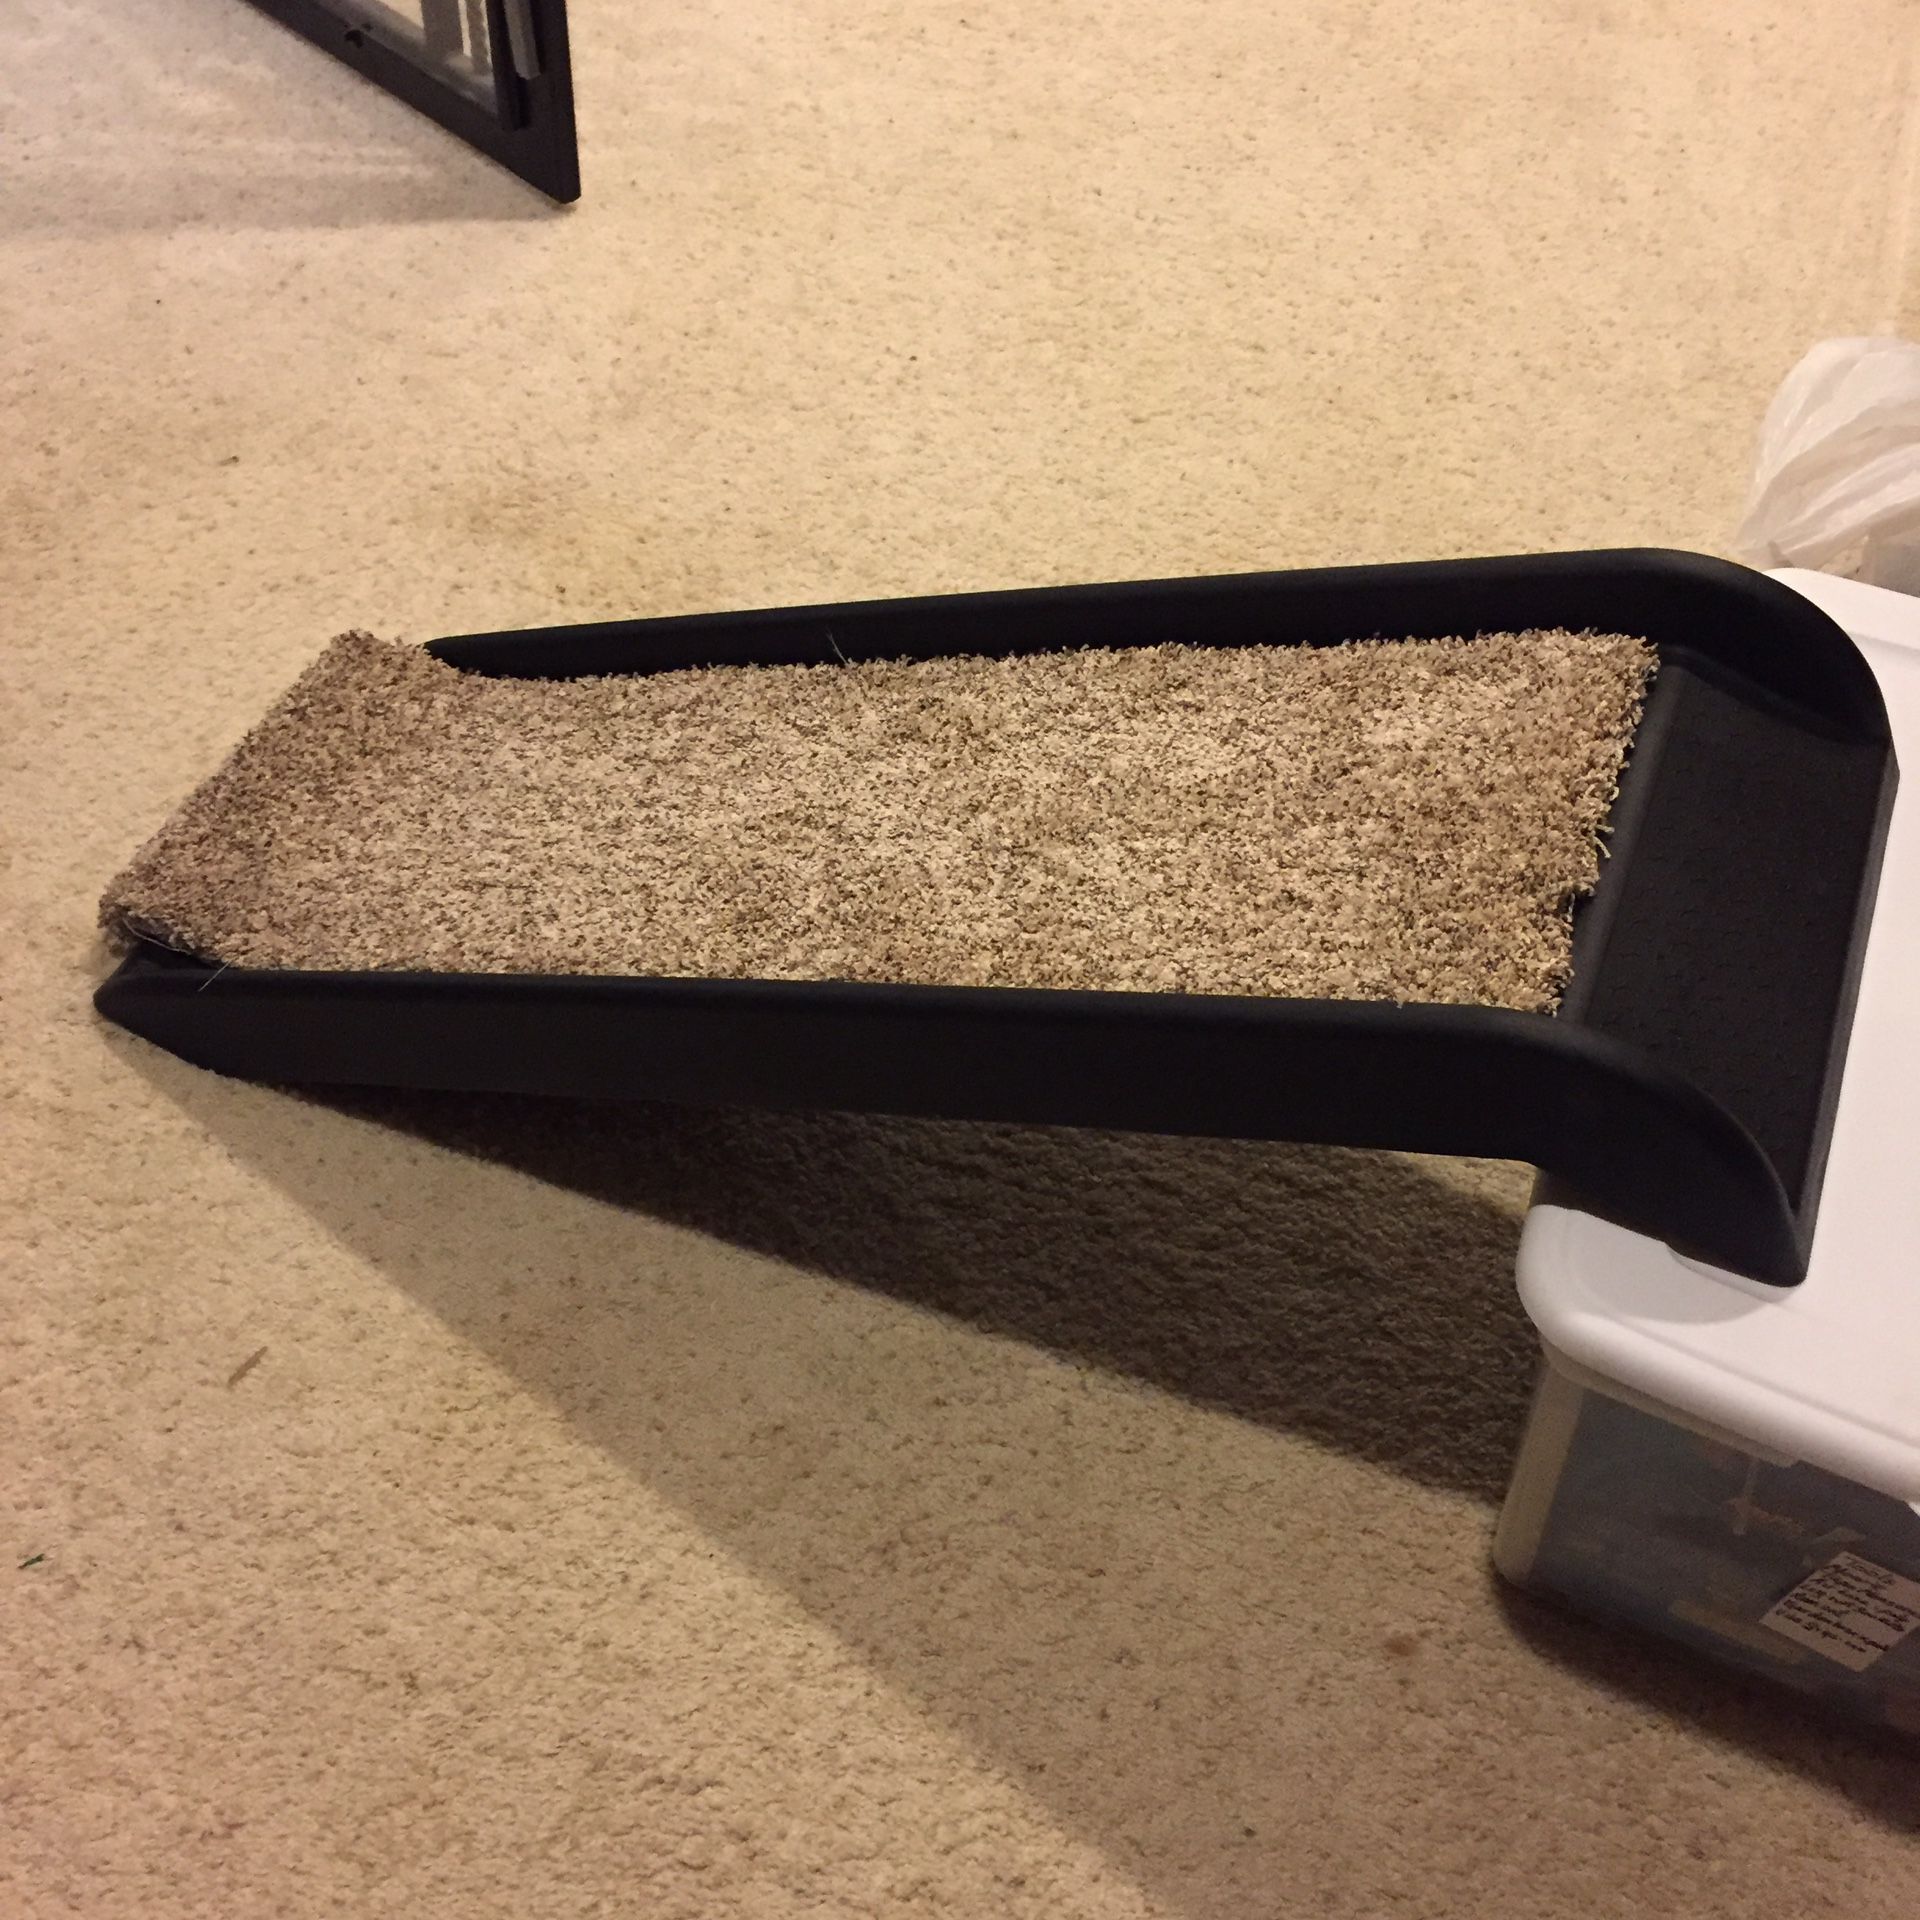 Pet Ramp for dogs. Works great for getting your dog onto the bed, couch or into the car. Very lightweight hard plastic. Easy